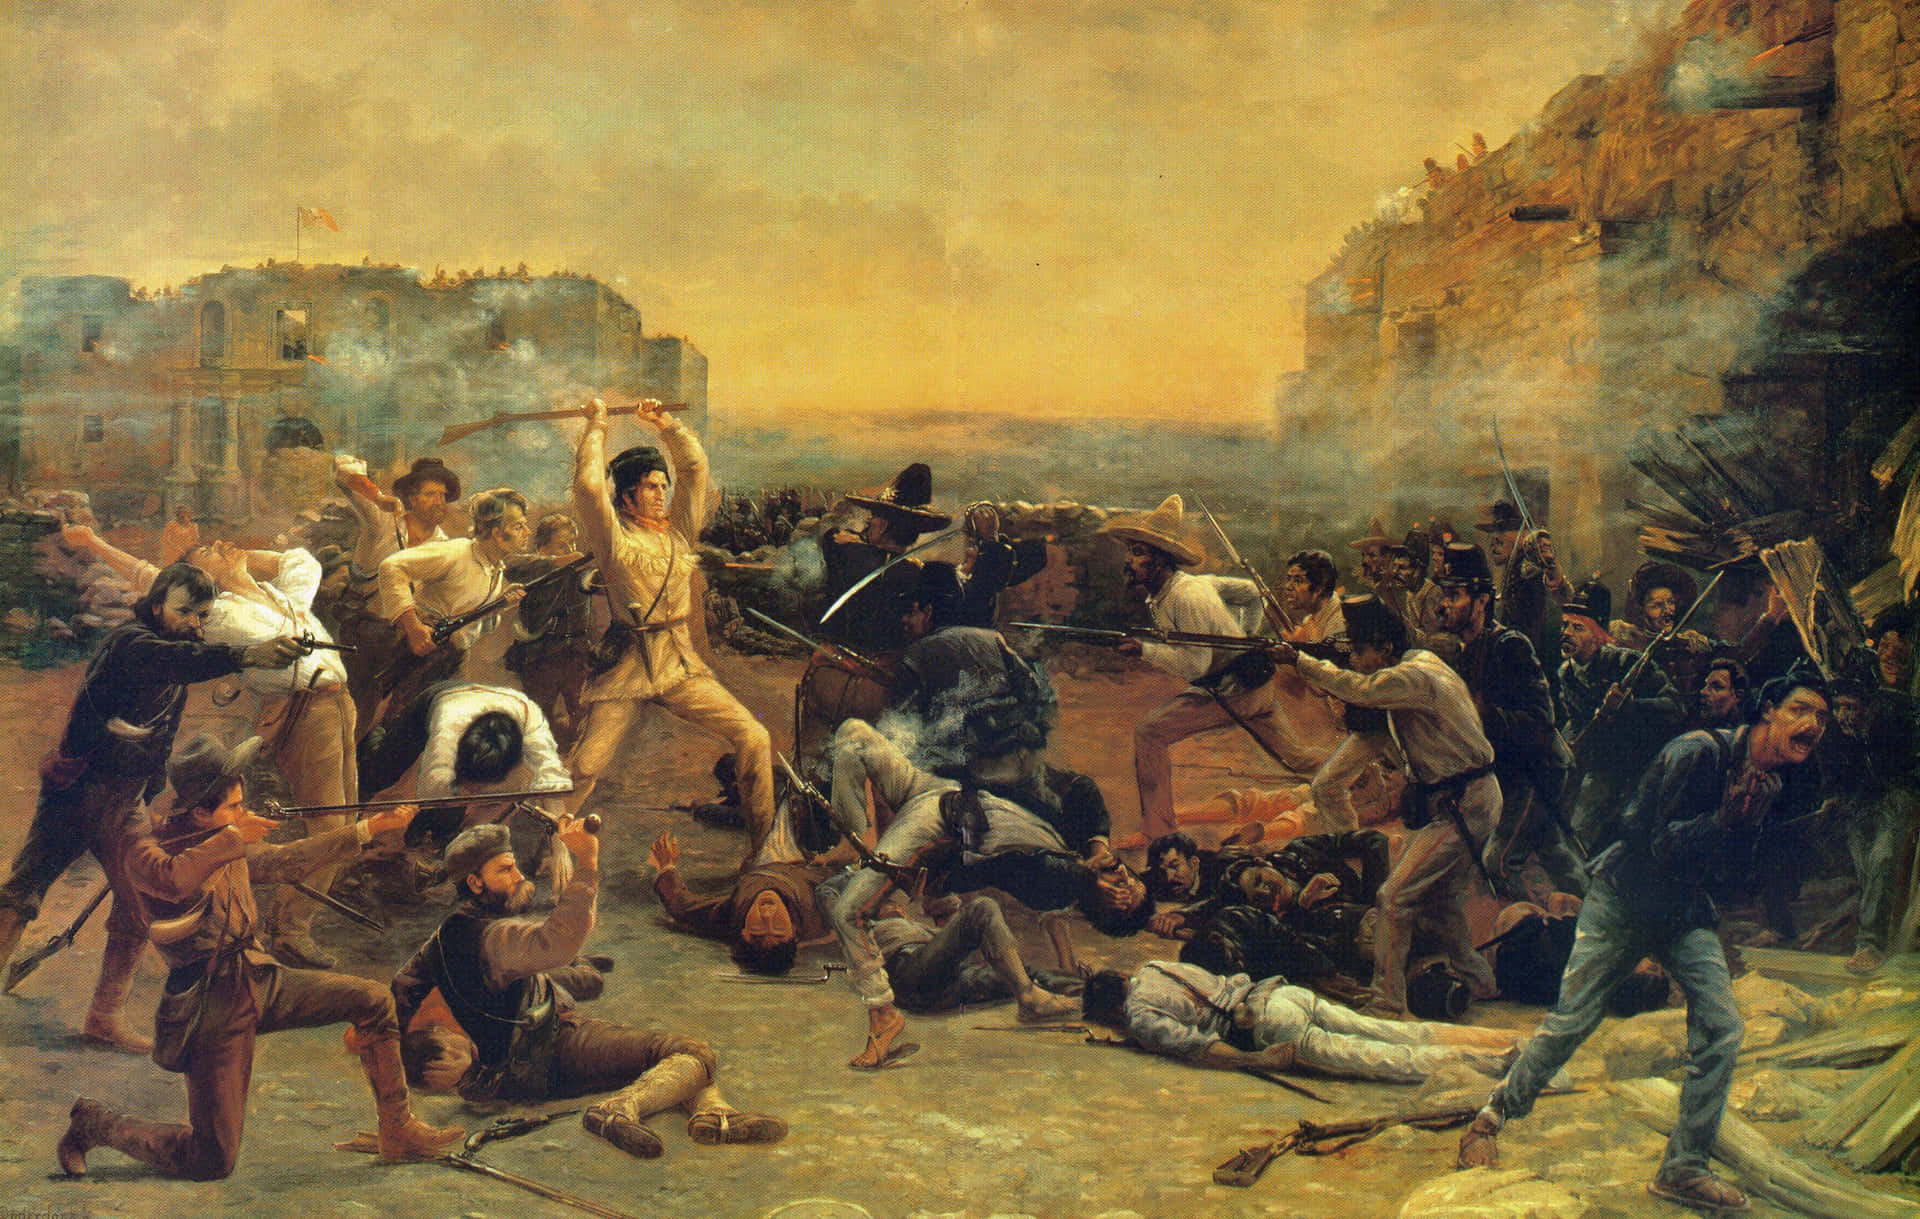 A Painting Of Men Fighting In A City